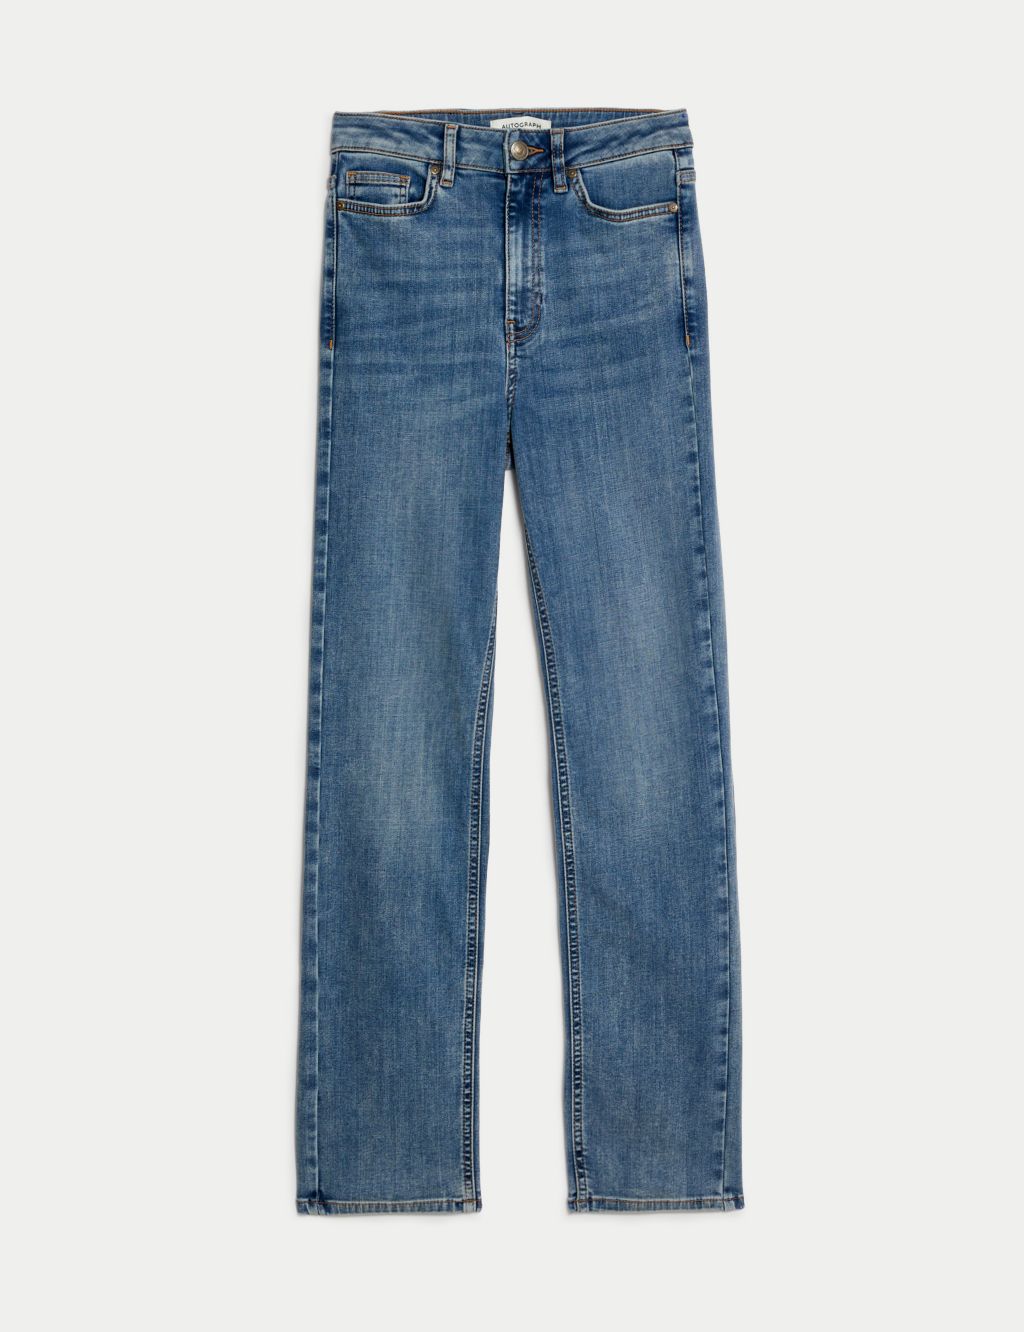 Lyocell™ Blend High Waisted Straight Leg Jeans image 1